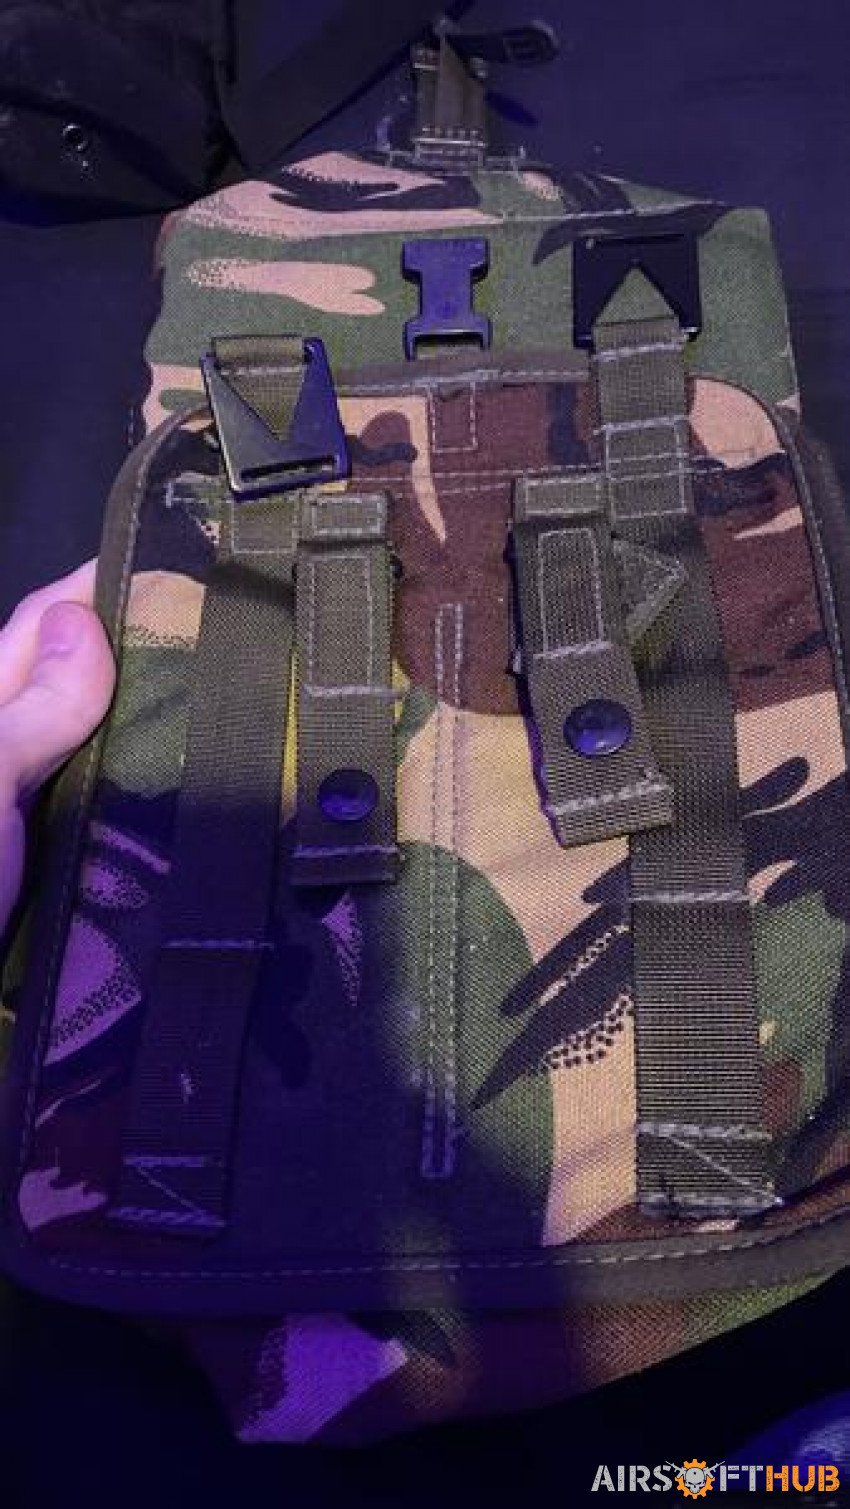 DPM LMG pouch - Used airsoft equipment